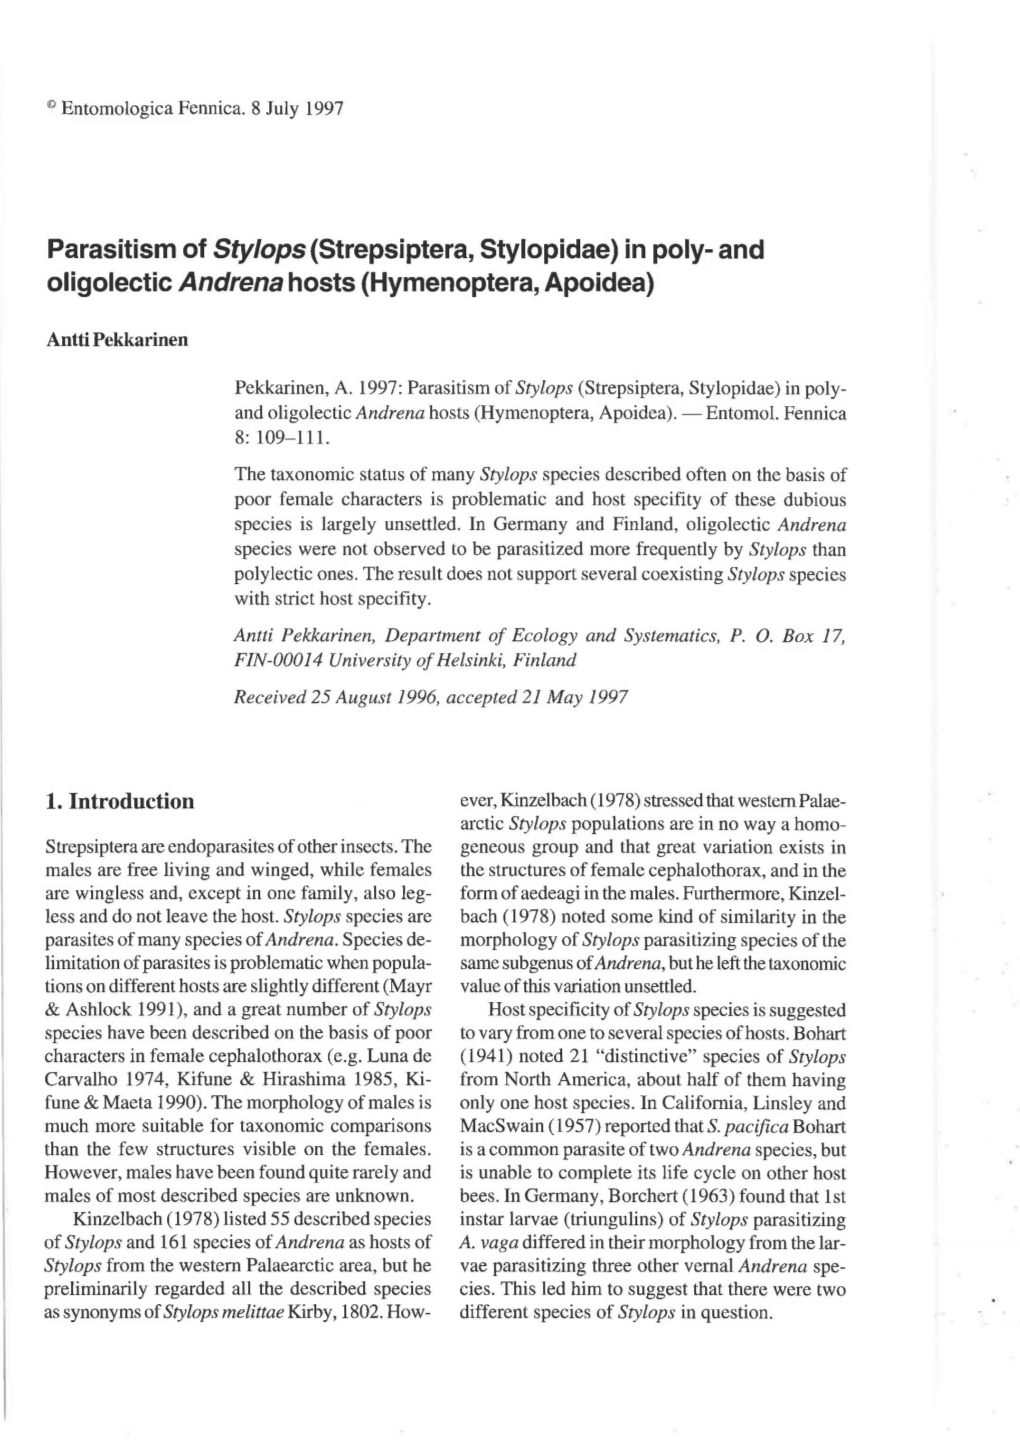 Parasitism of Sty/Ops(Strepsiptera, Stylopidae) in Poly- and Oligolectic Andrena Hosts (Hymenoptera, Apoidea)